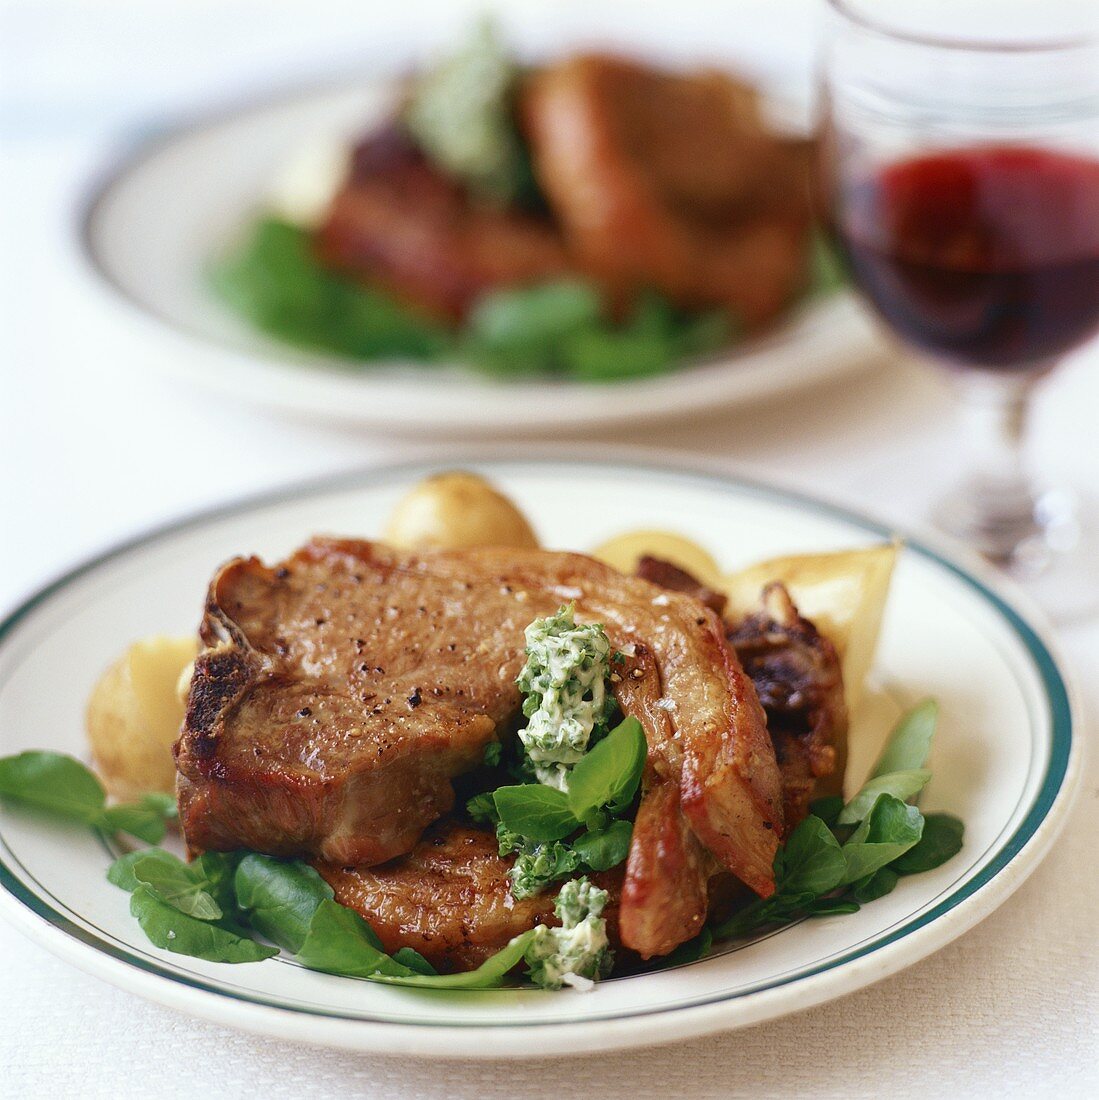 Lamb chops with herb butter and watercress